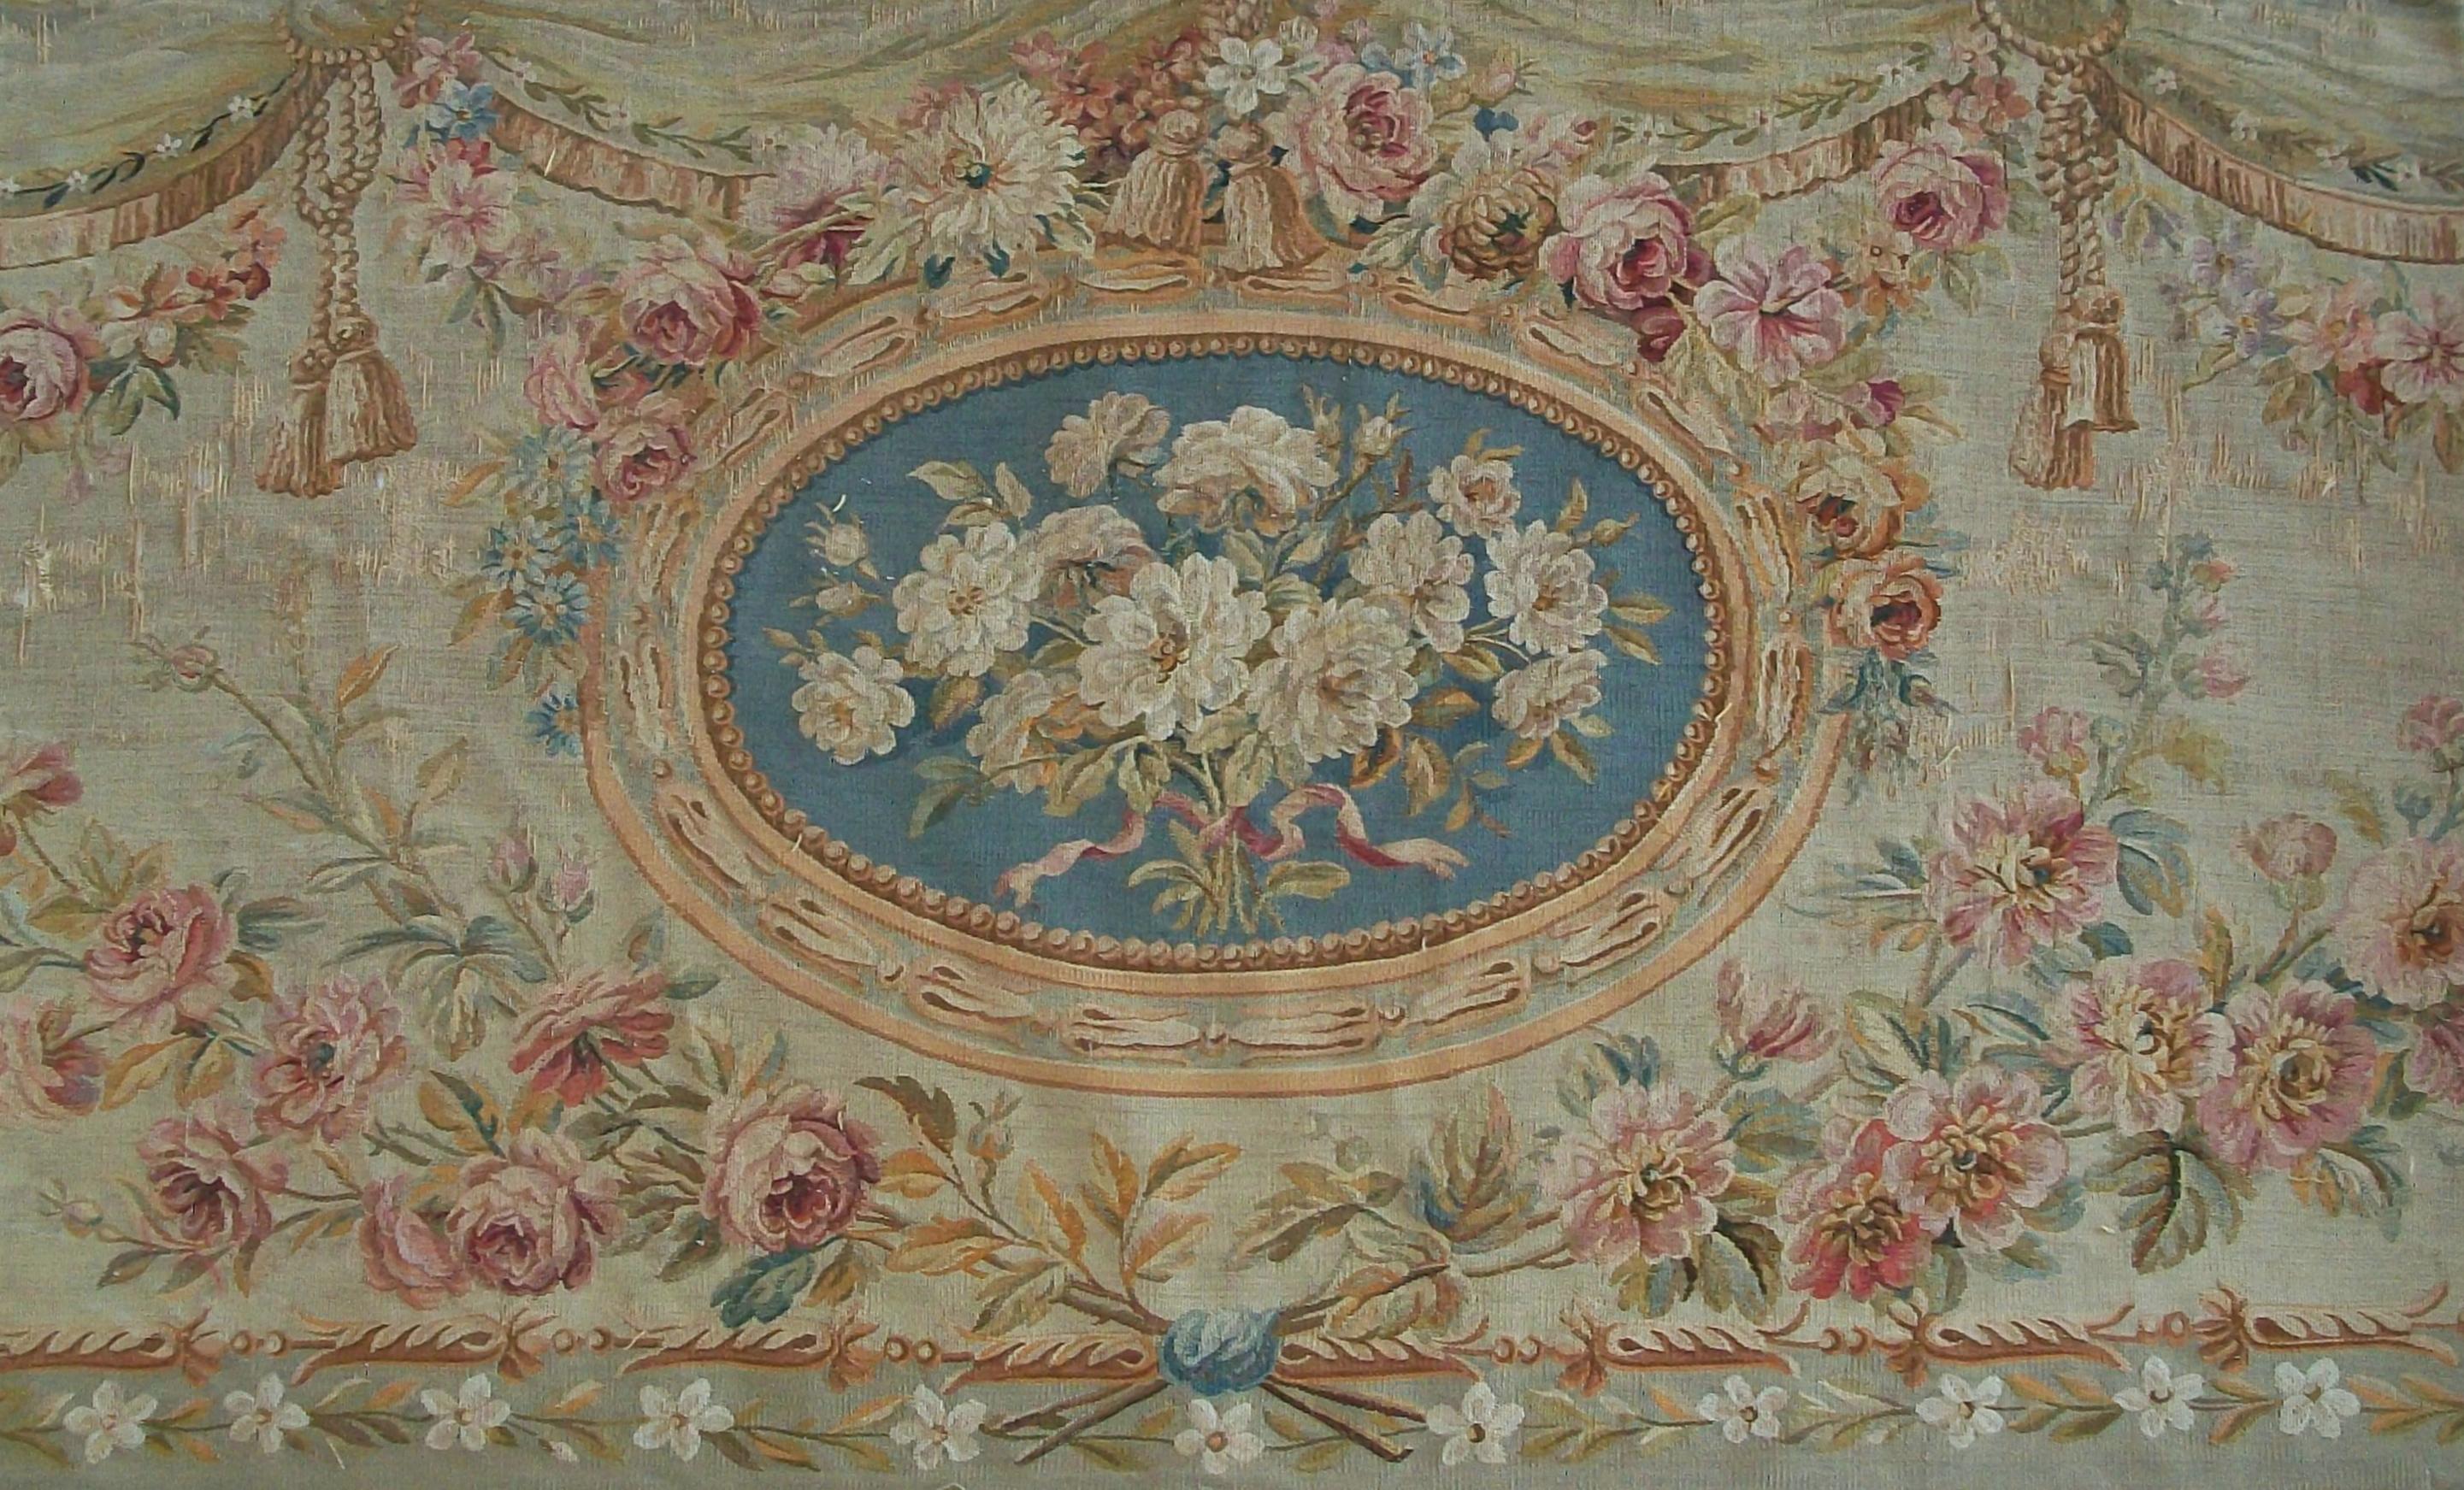 Pierre Adrien Chabal-DUSSURGEY (1819-1902) Designer - BEAUVAIS TAPESTRY MANUFACTORY Maker - Important Antique Louis XVI style floral tapestry settee back fragment - the floral tapestry finely woven in wool and silk threads with garlands and swags